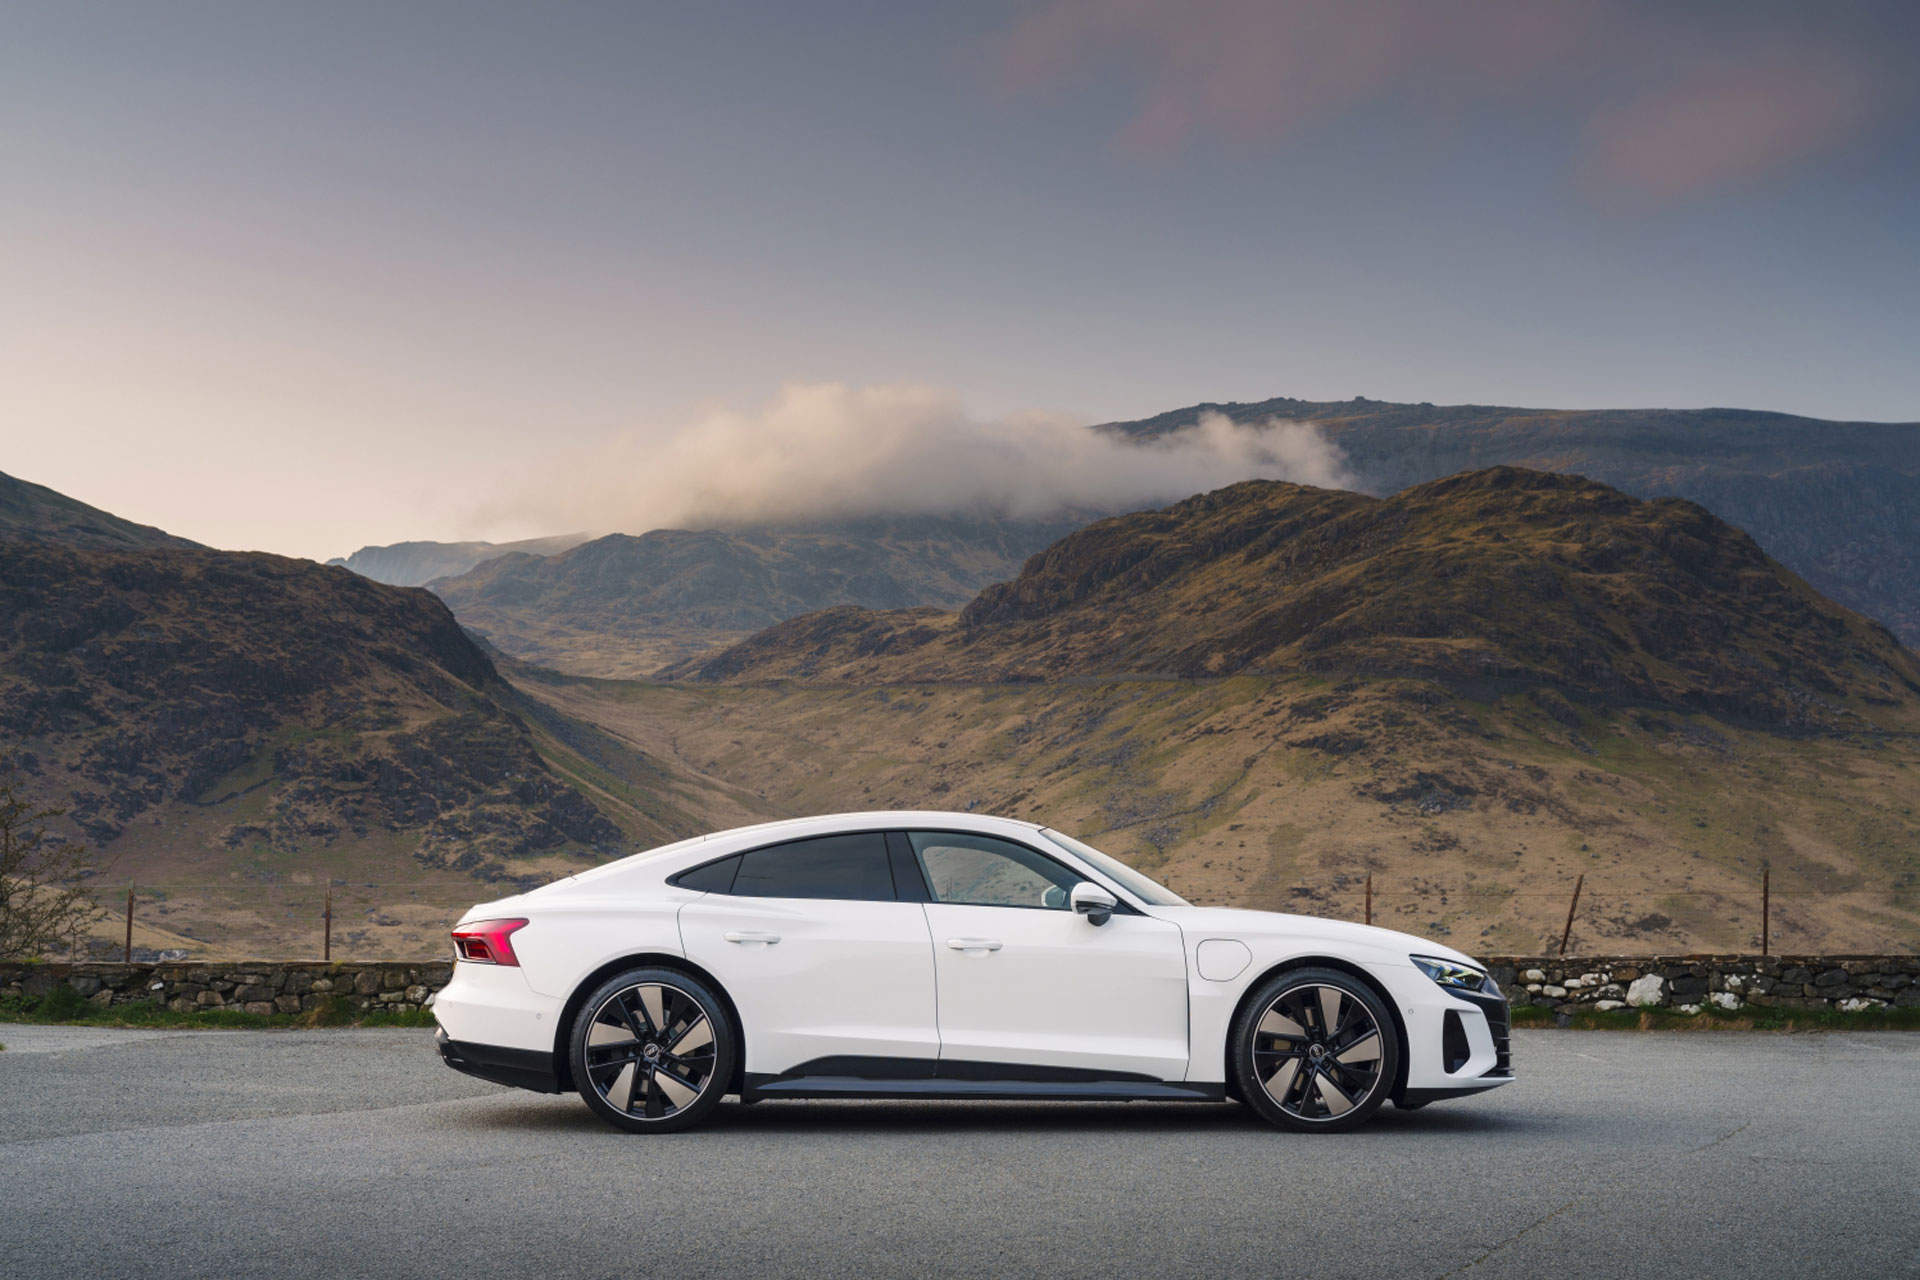 a side view of the Audi e-tron GT with a mountainous landscape behind